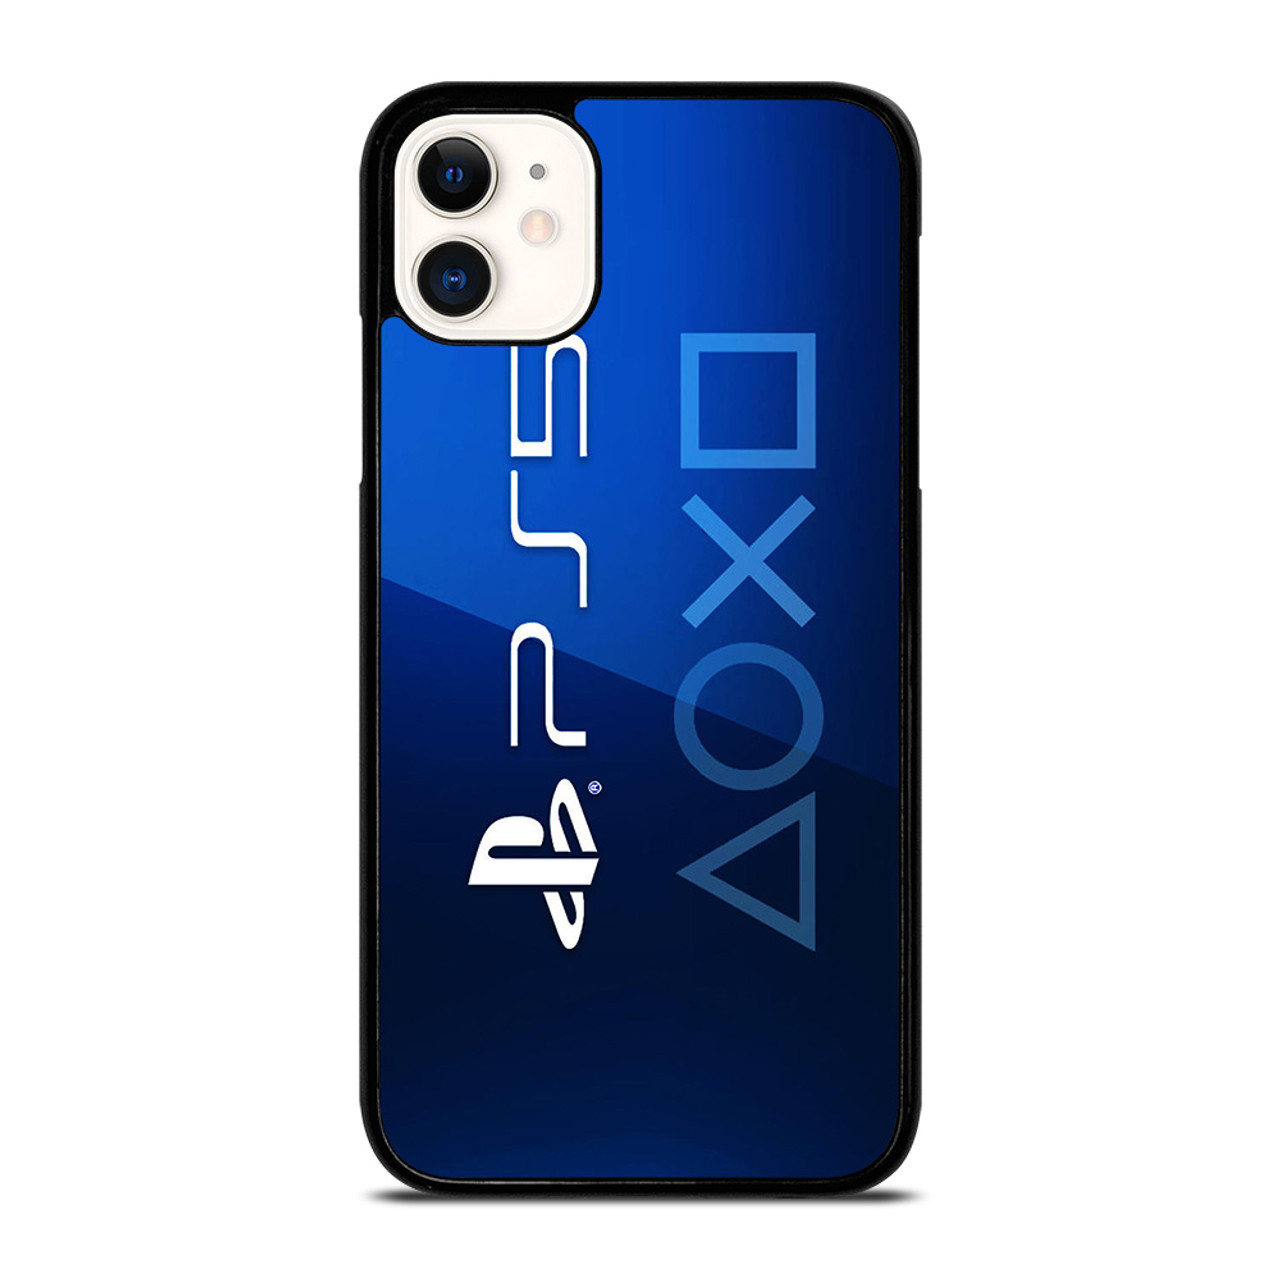 PS5 PLAYSTATION 5 LOGO BLUE iPhone 11 Case Cover